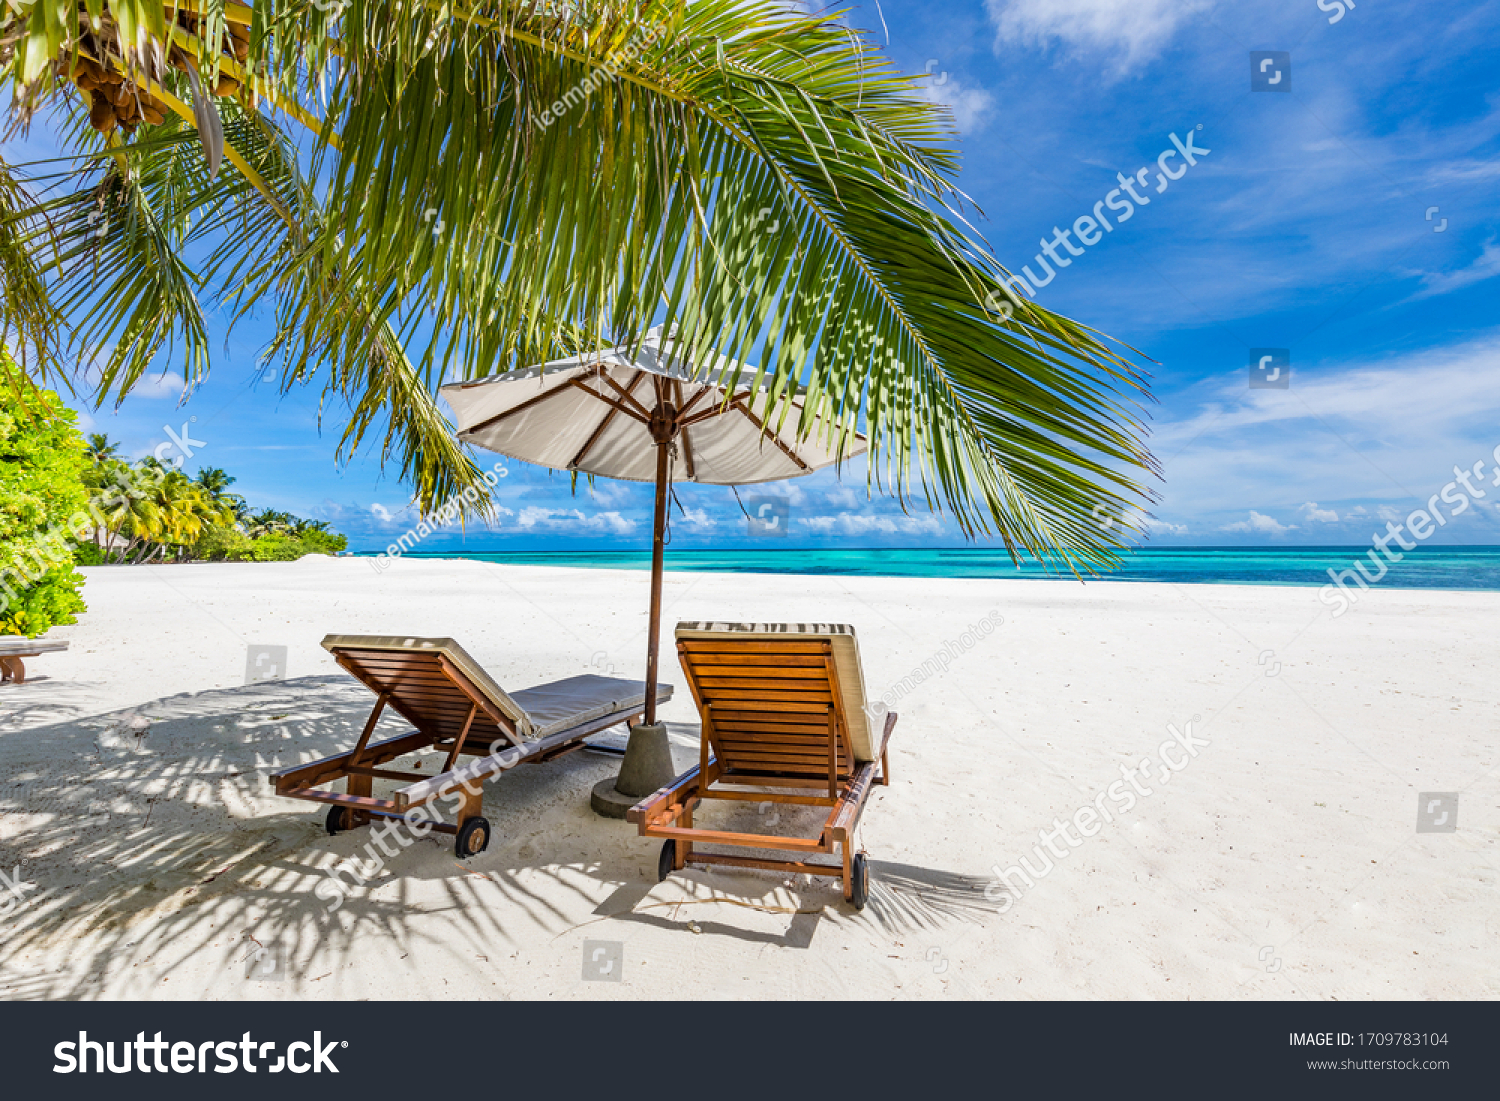 Tropical beach nature as summer landscape with lounge chairs and palm trees and calm sea for beach banner. Luxurious travel landscape, beautiful destination for vacation or holiday. Beach scene
 #1709783104